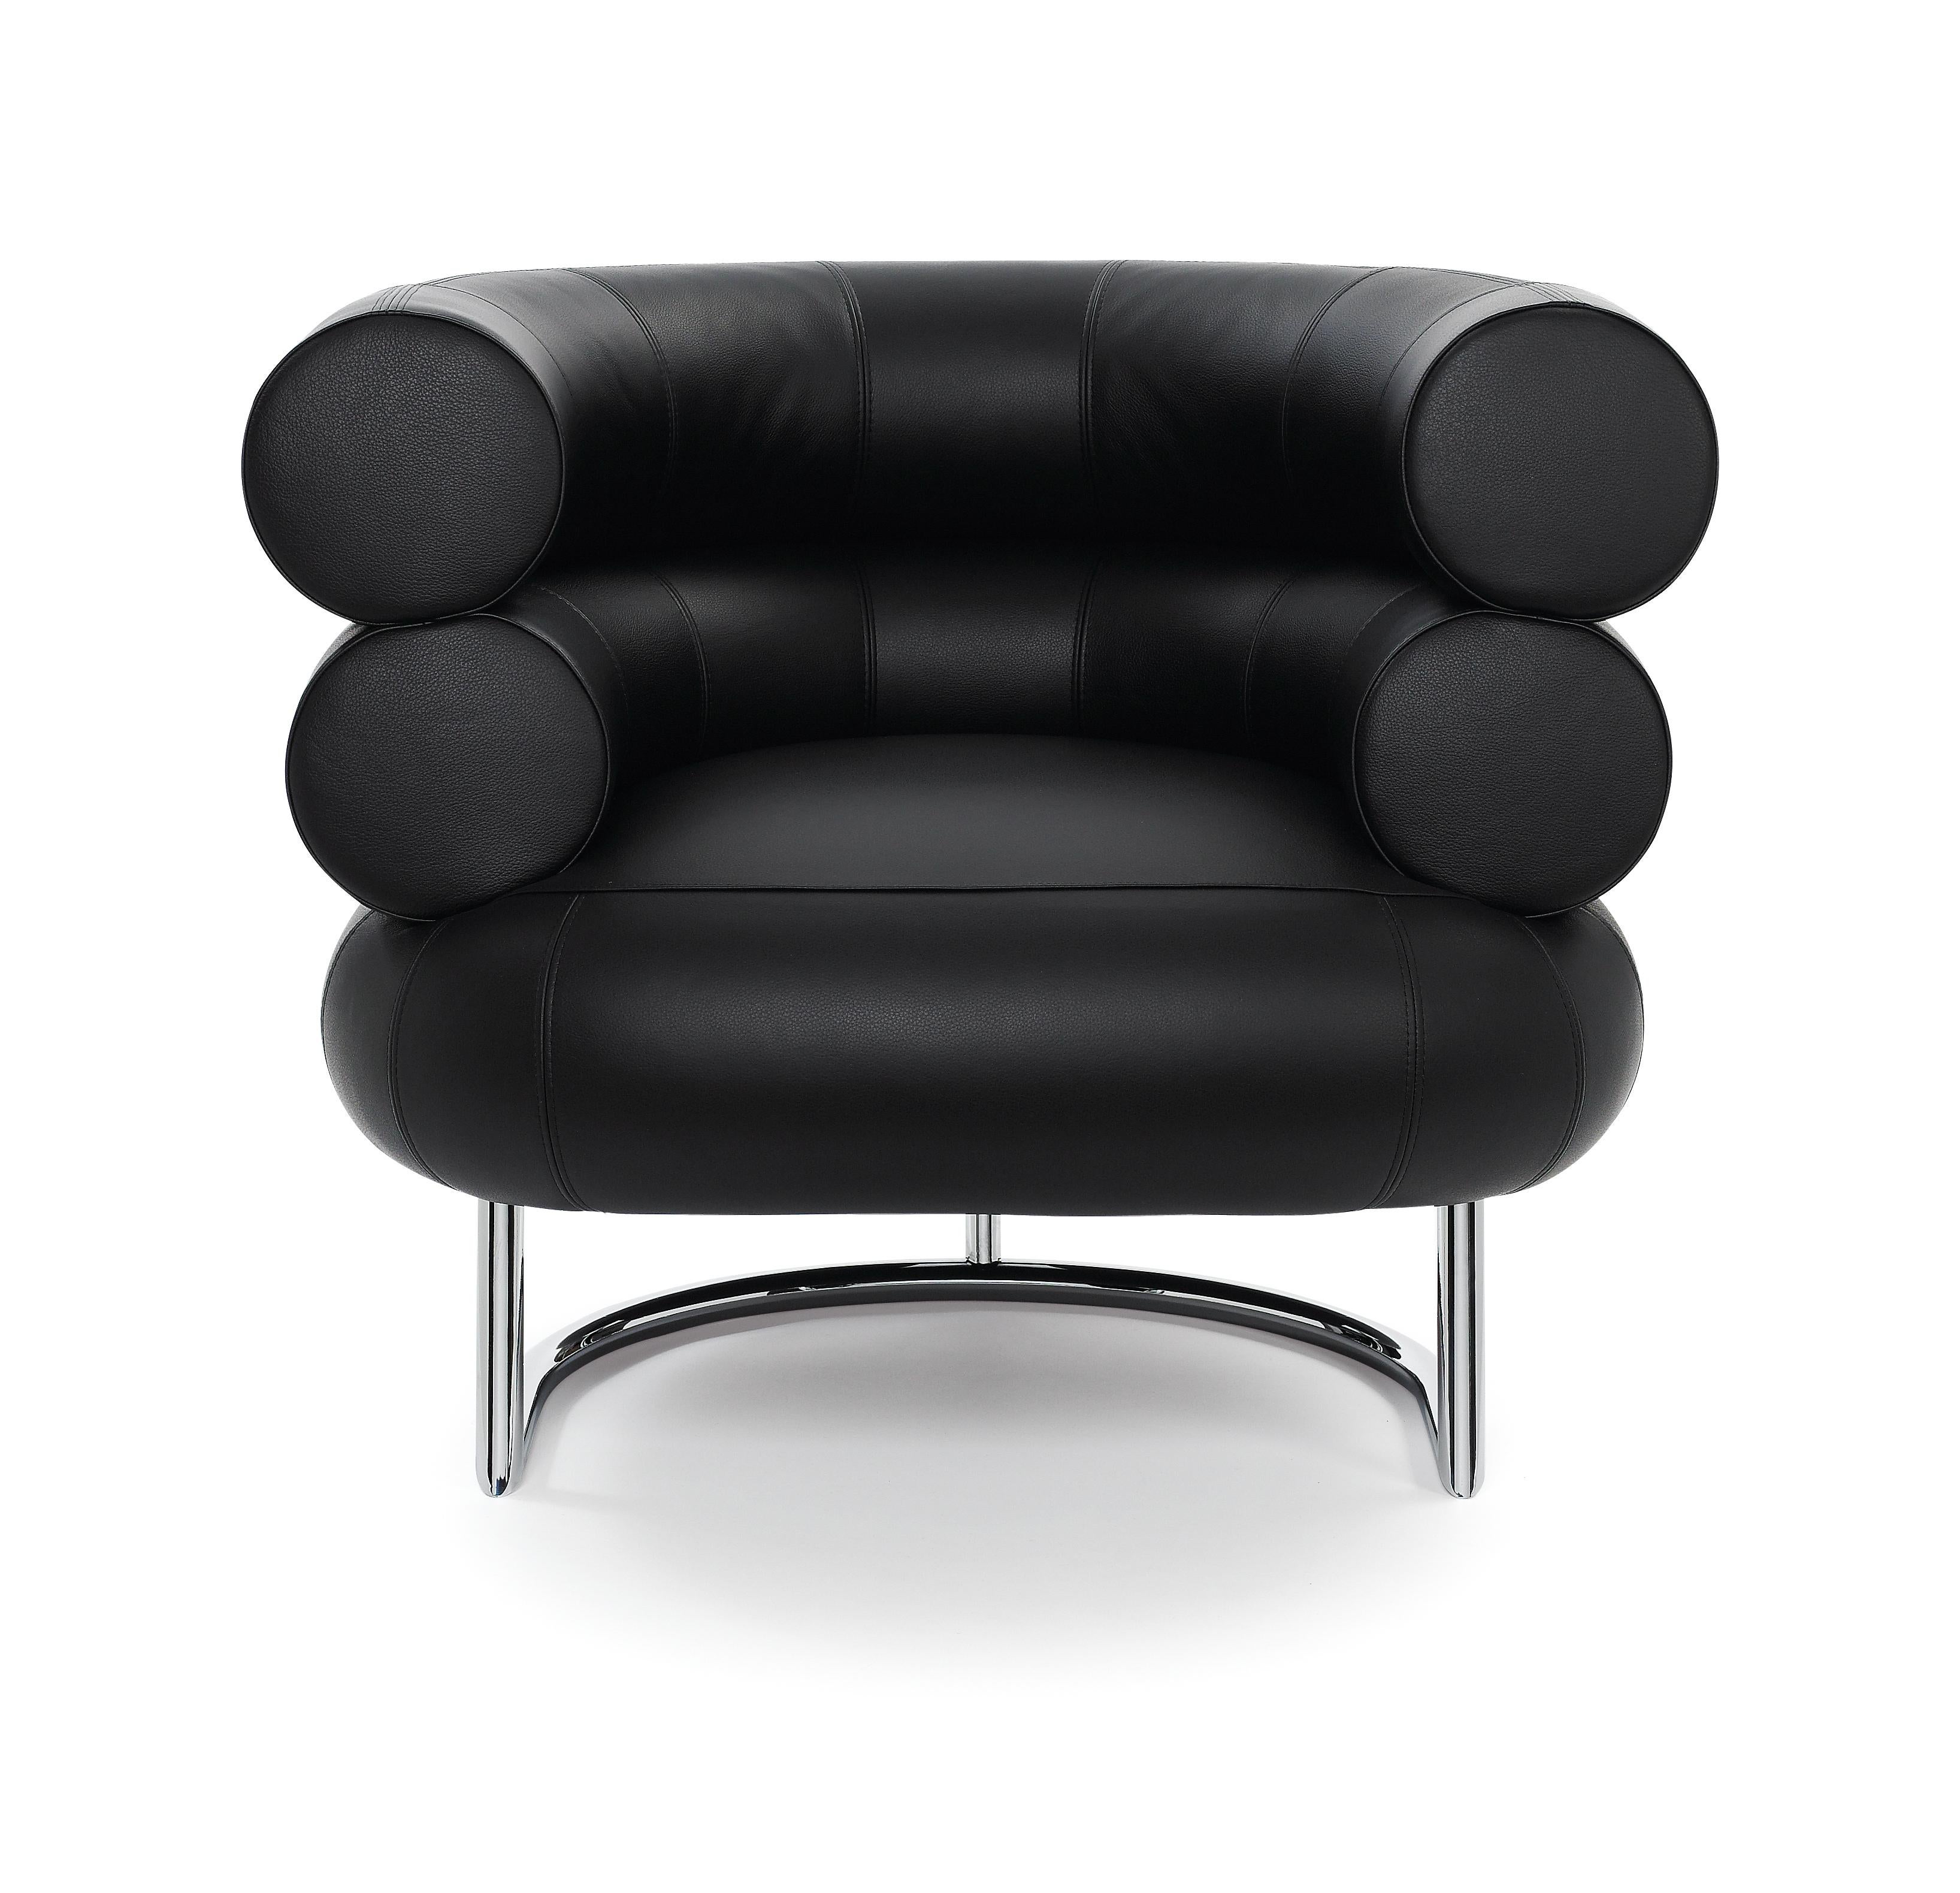 Bibendum is one of a kind. Nowhere in the history of design will one find an armchair that compares to this. It is captivatingly harmonious despite its size and unites a majestic impressiveness with charm and esprit like no other leather armchair.